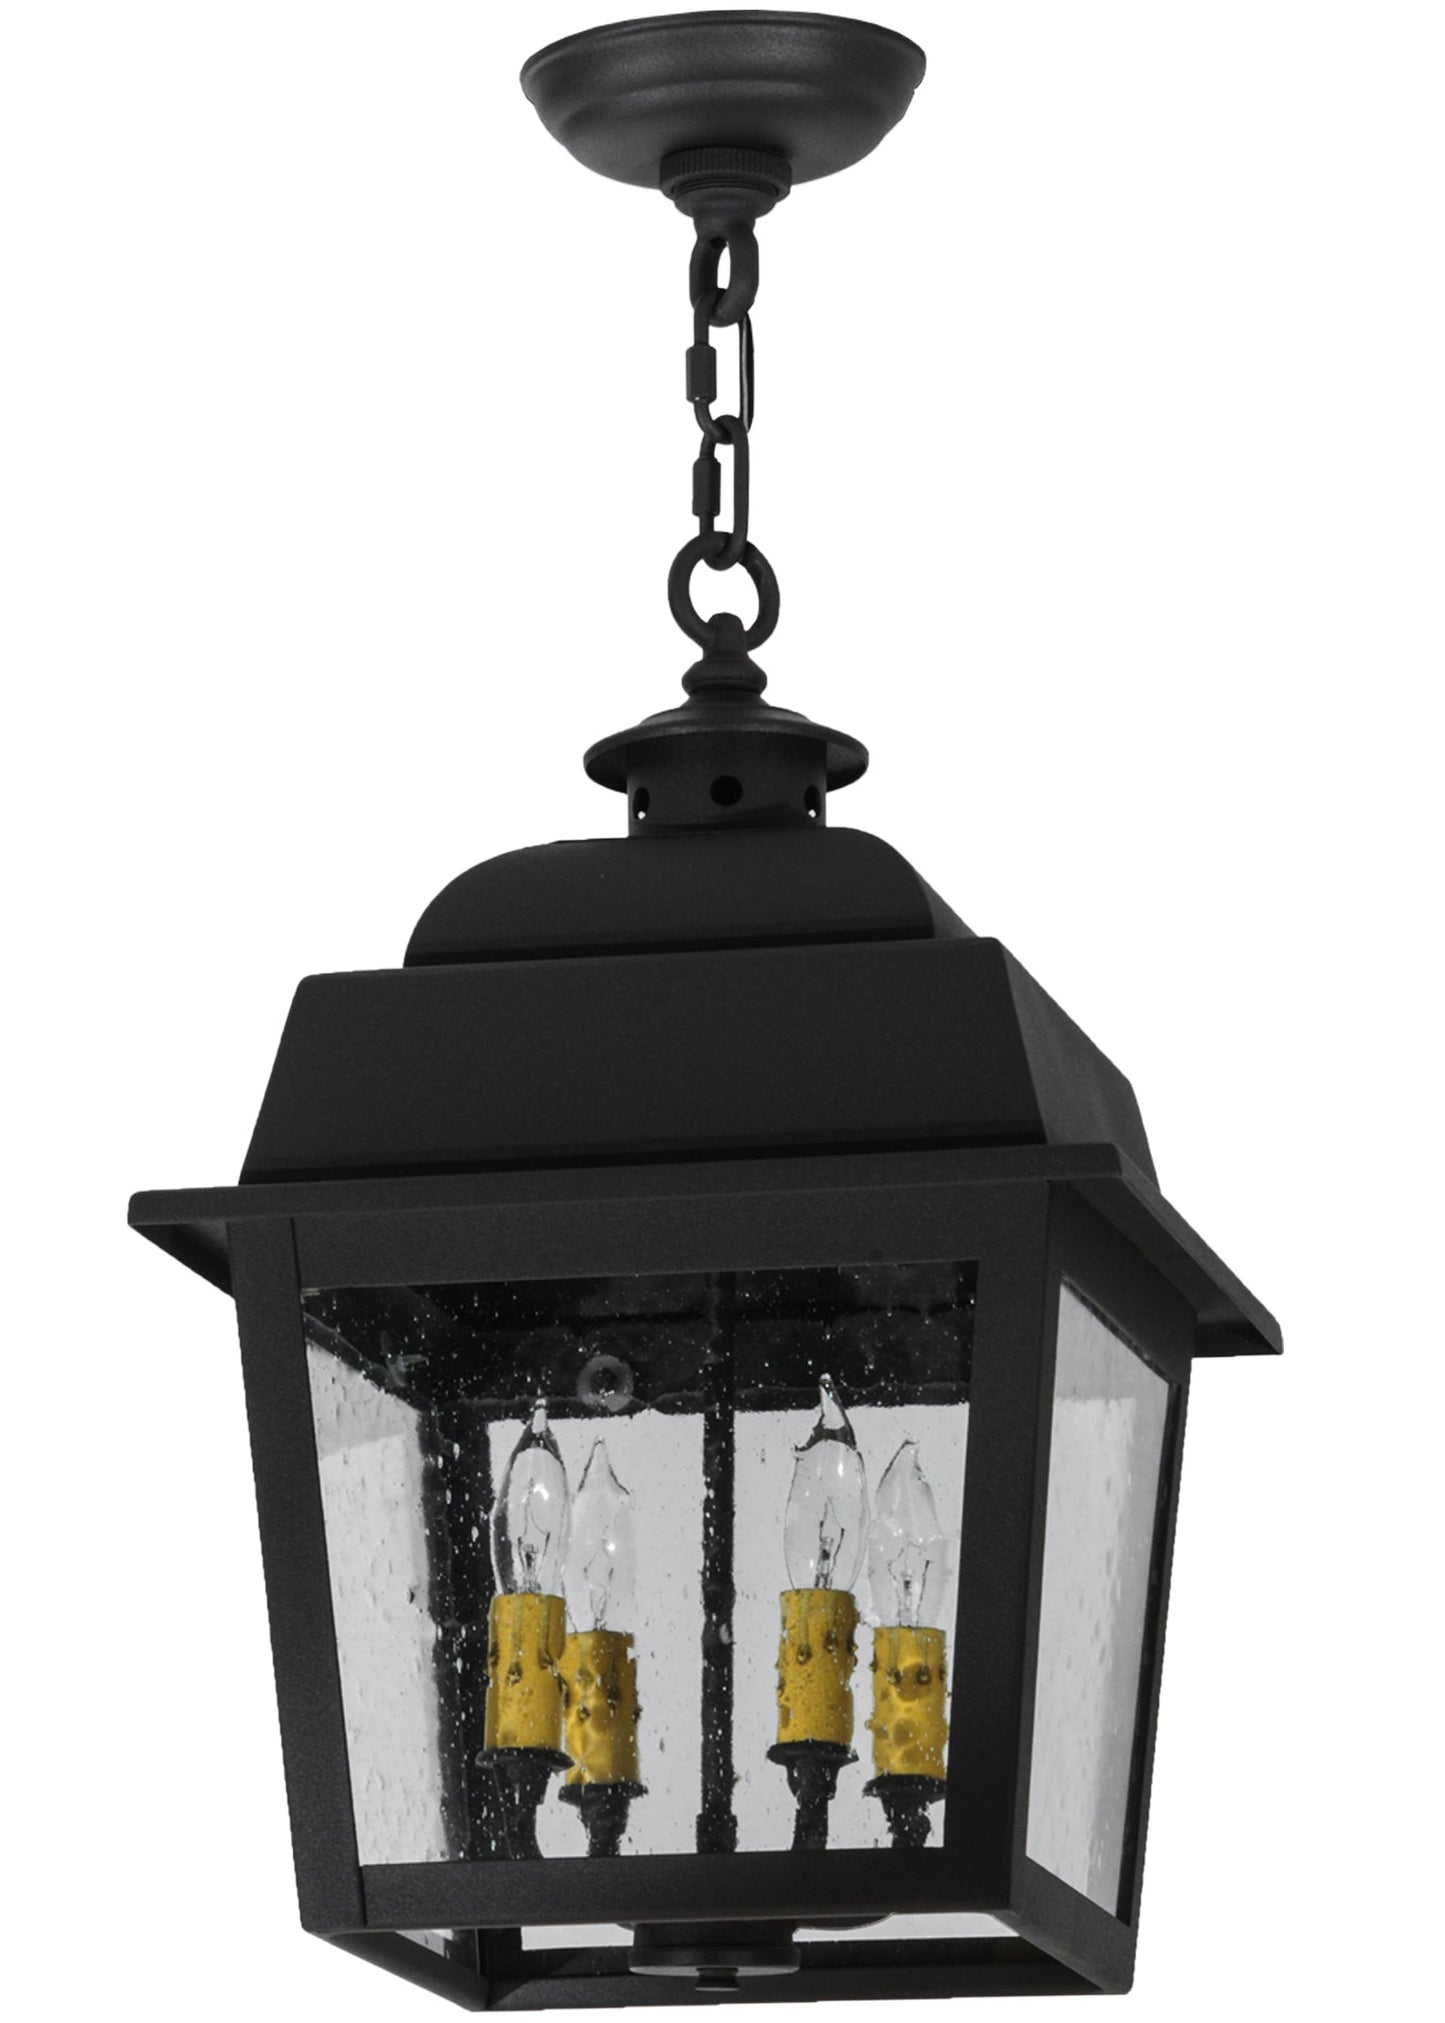 12" Square Stockwell Hanging Lantern Pendant by 2nd Ave Lighting